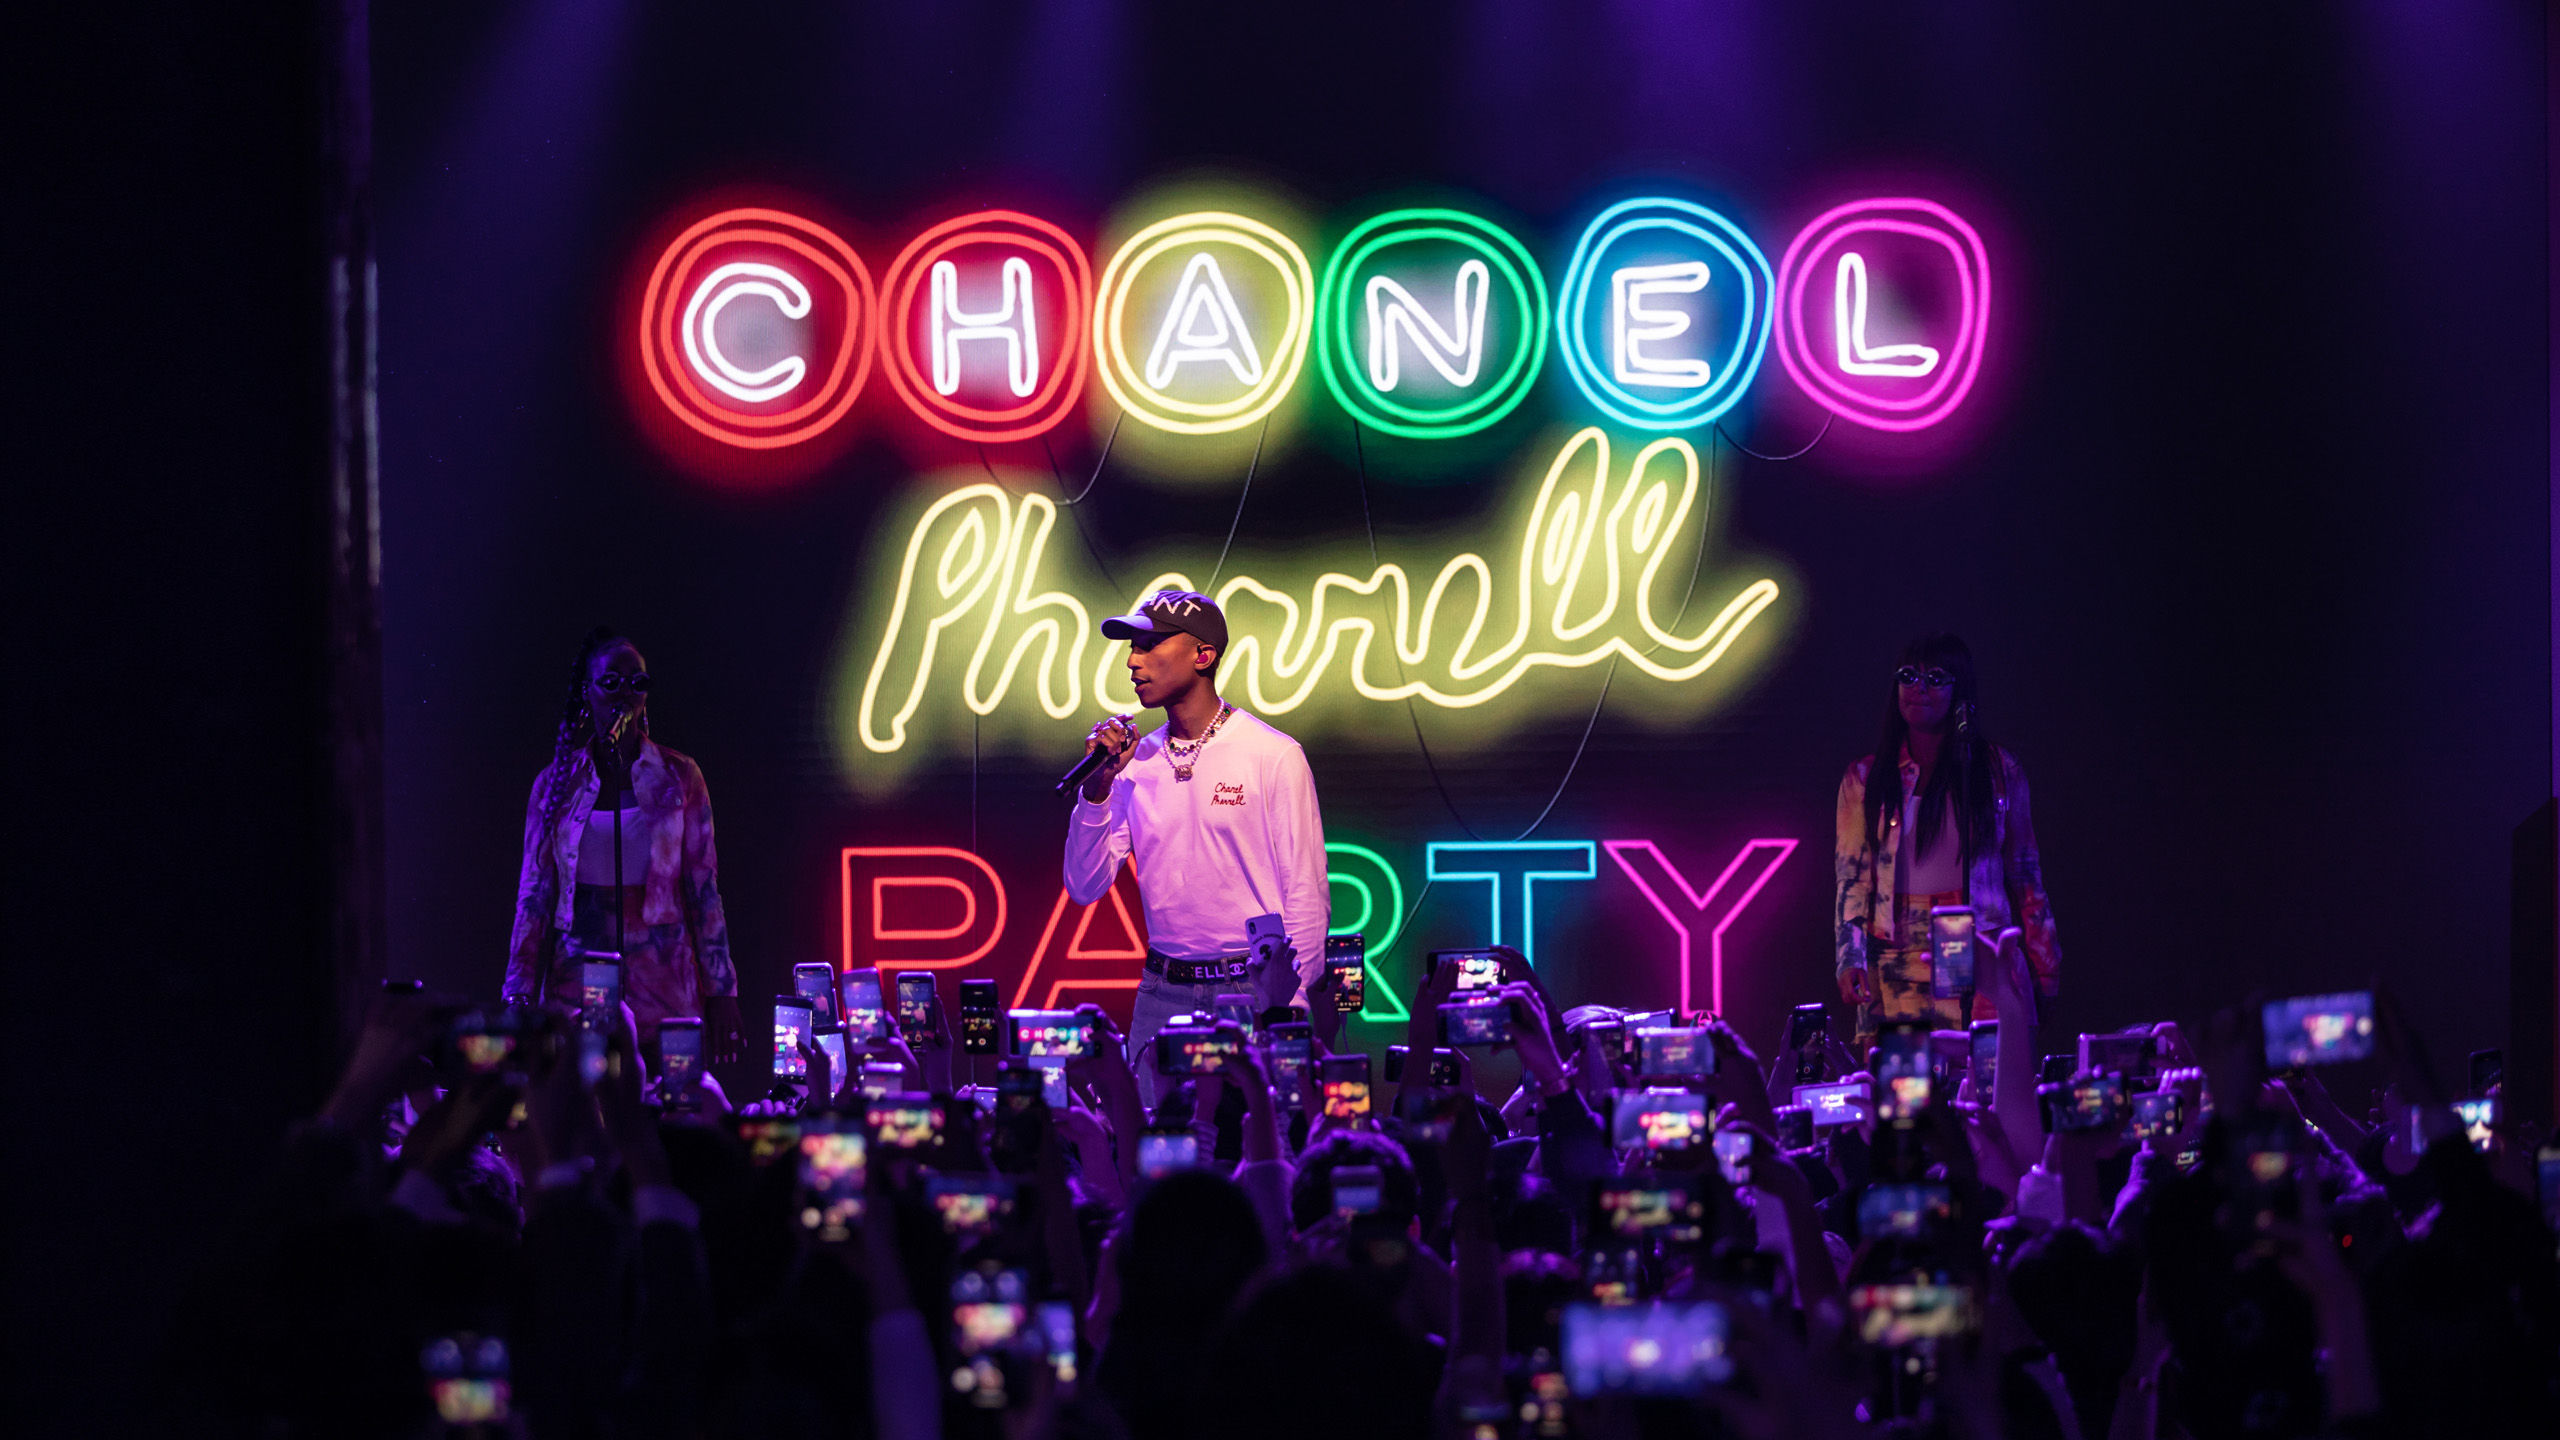 Pharrell Williams offers an urban take on Chanel with highly anticipated capsule collection